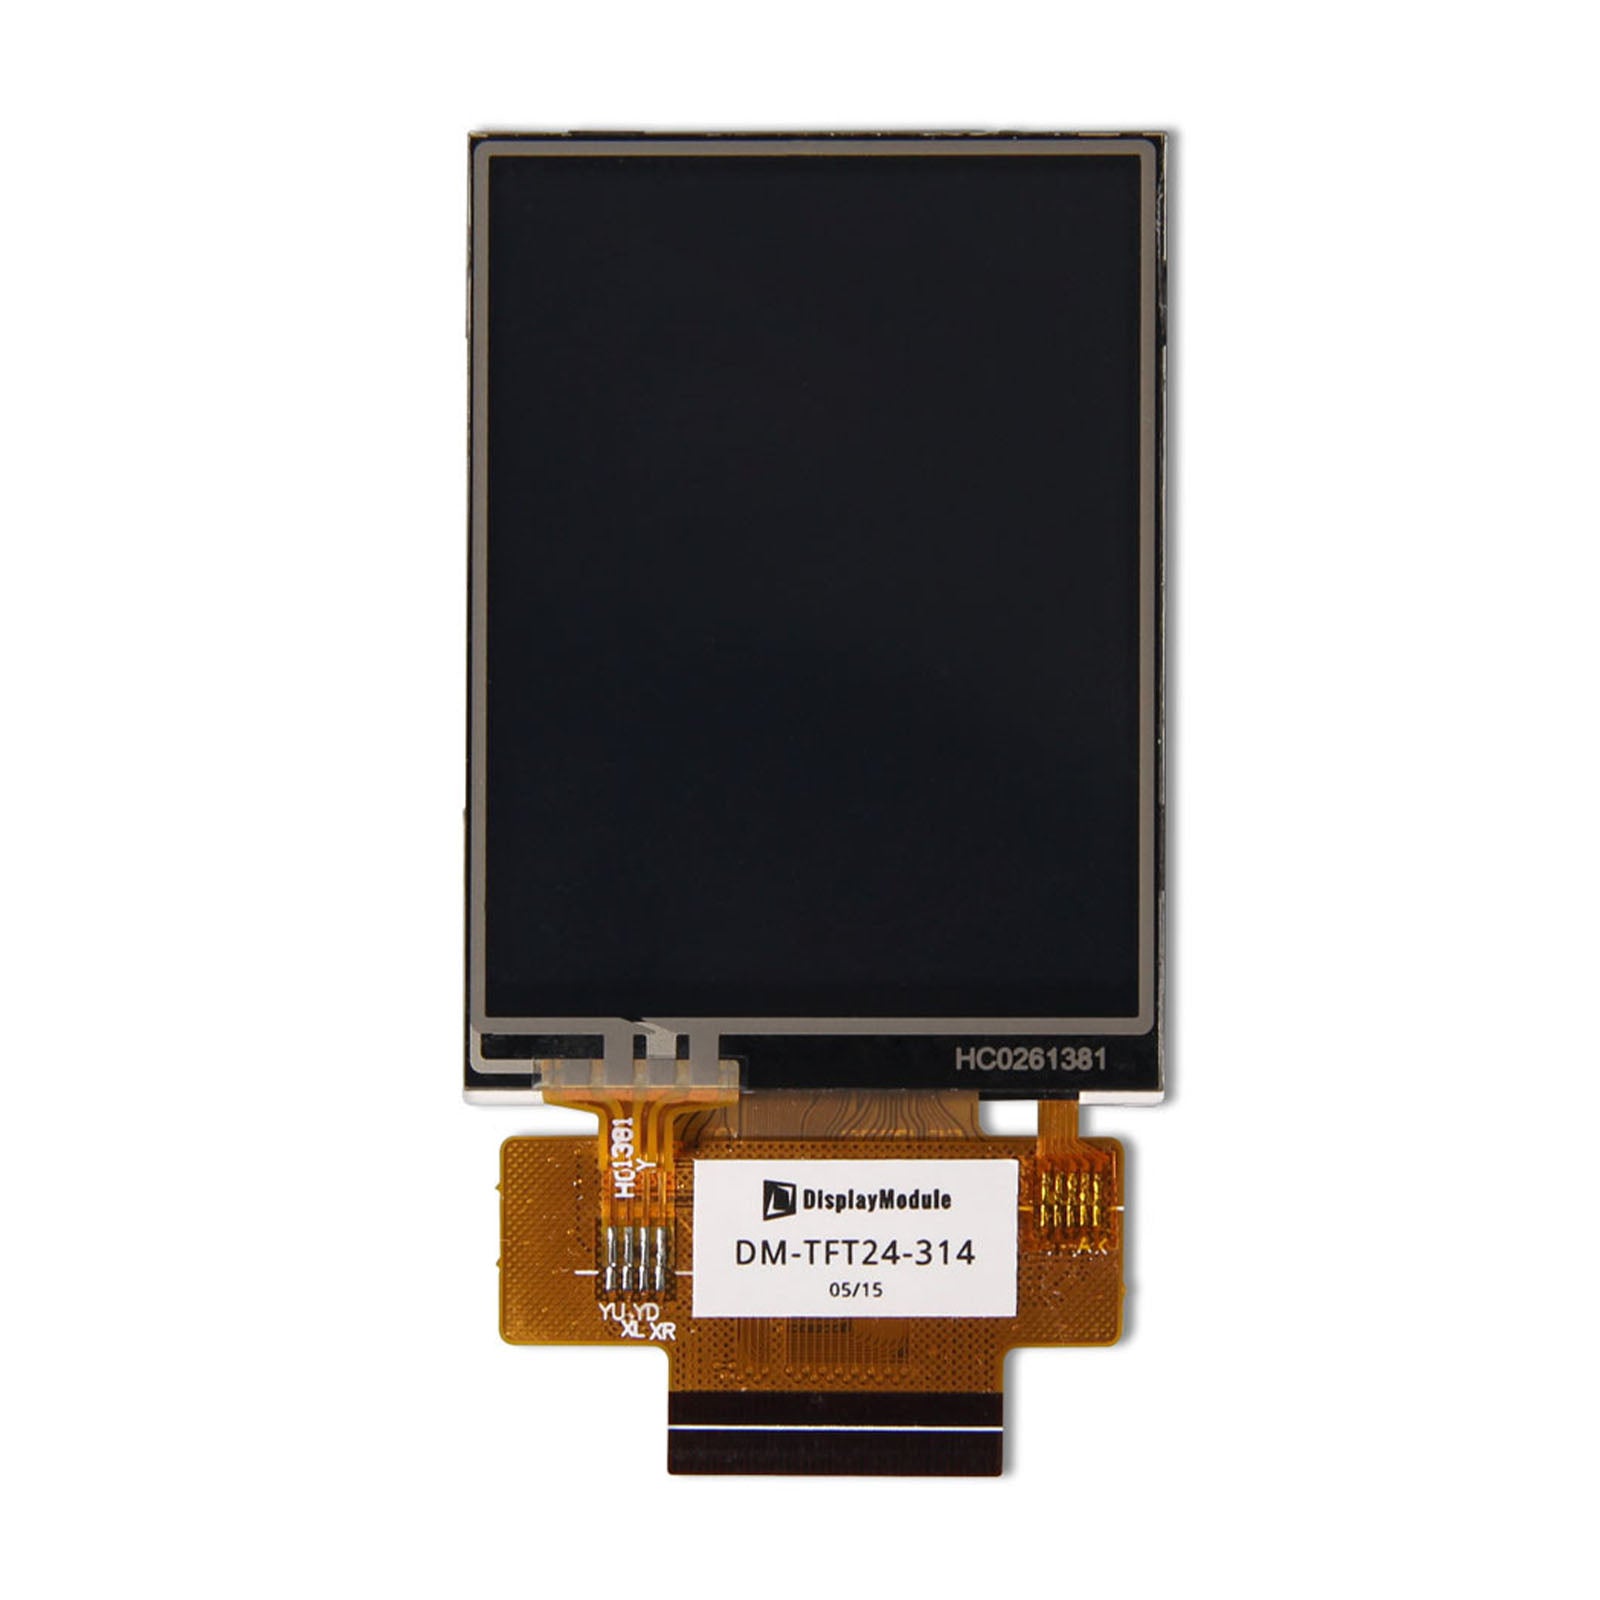 2.4 inch TFT Display Panel with ILI9341 driver and 240x320 resolution, featuring resistive touch capability, utilizing MCU interface